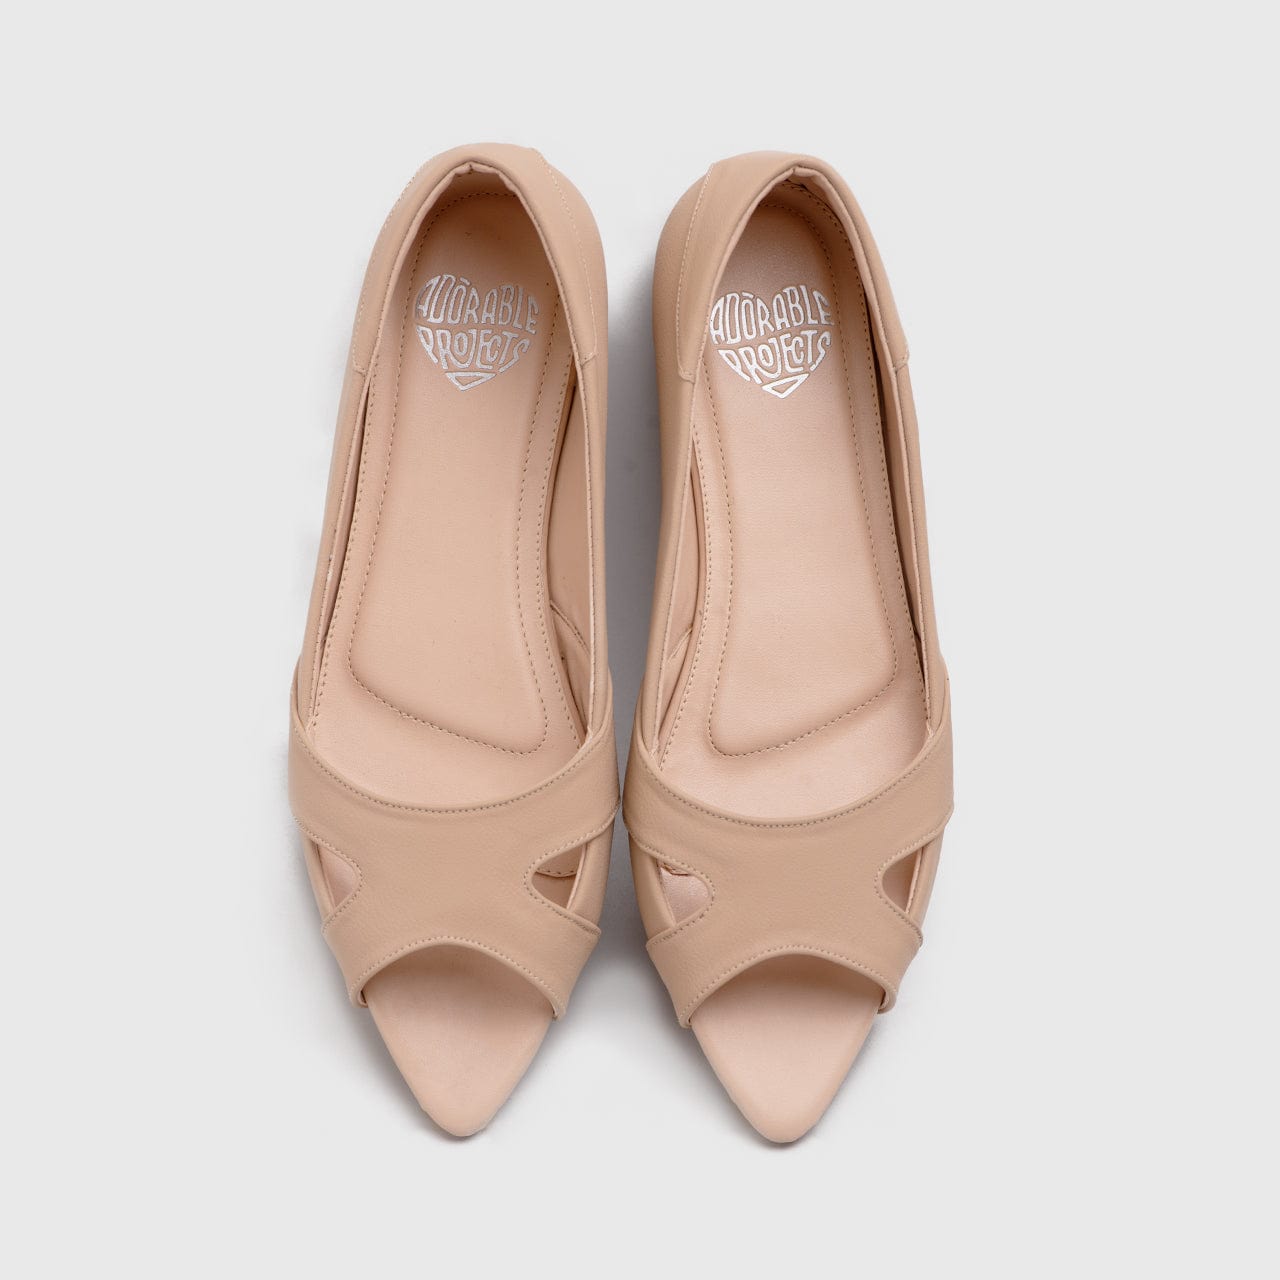 Adorable Projects Official Adorableprojects - Syabira Flat Shoes Nude - Sepatu Flat